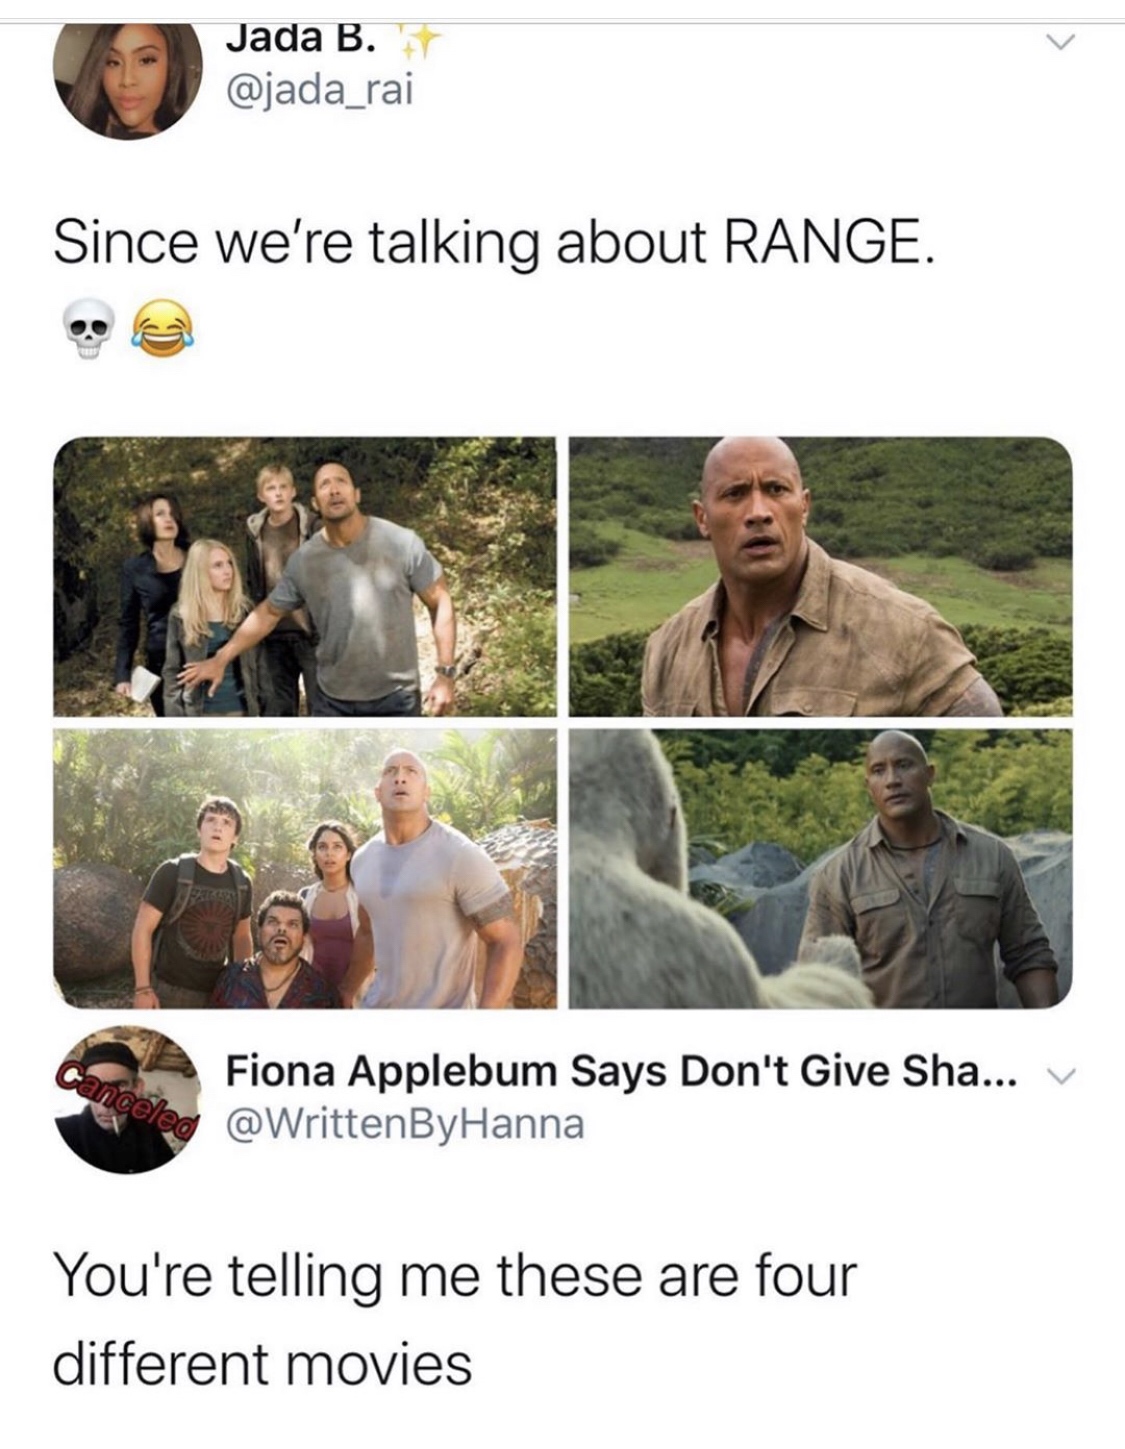 human behavior - Jada B. Since we're talking about Range. Once Fiona Applebum Says Don't Give Sha... V You're telling me these are four different movies